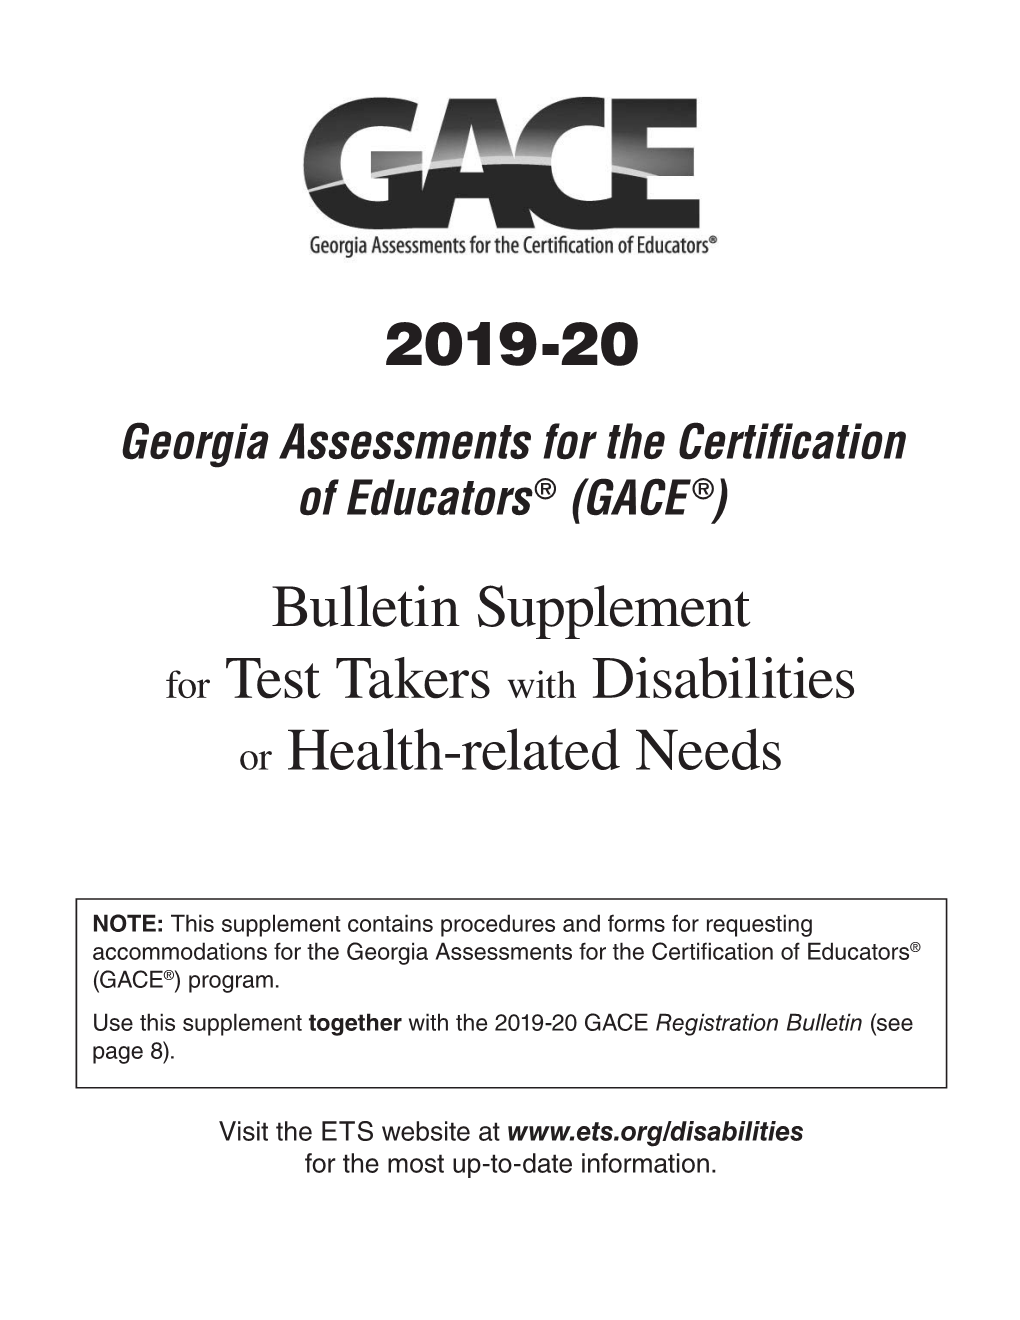 2019-20 GACE Bulletin Supplement for Test Takers with Disabilities Or Health-Related Needs